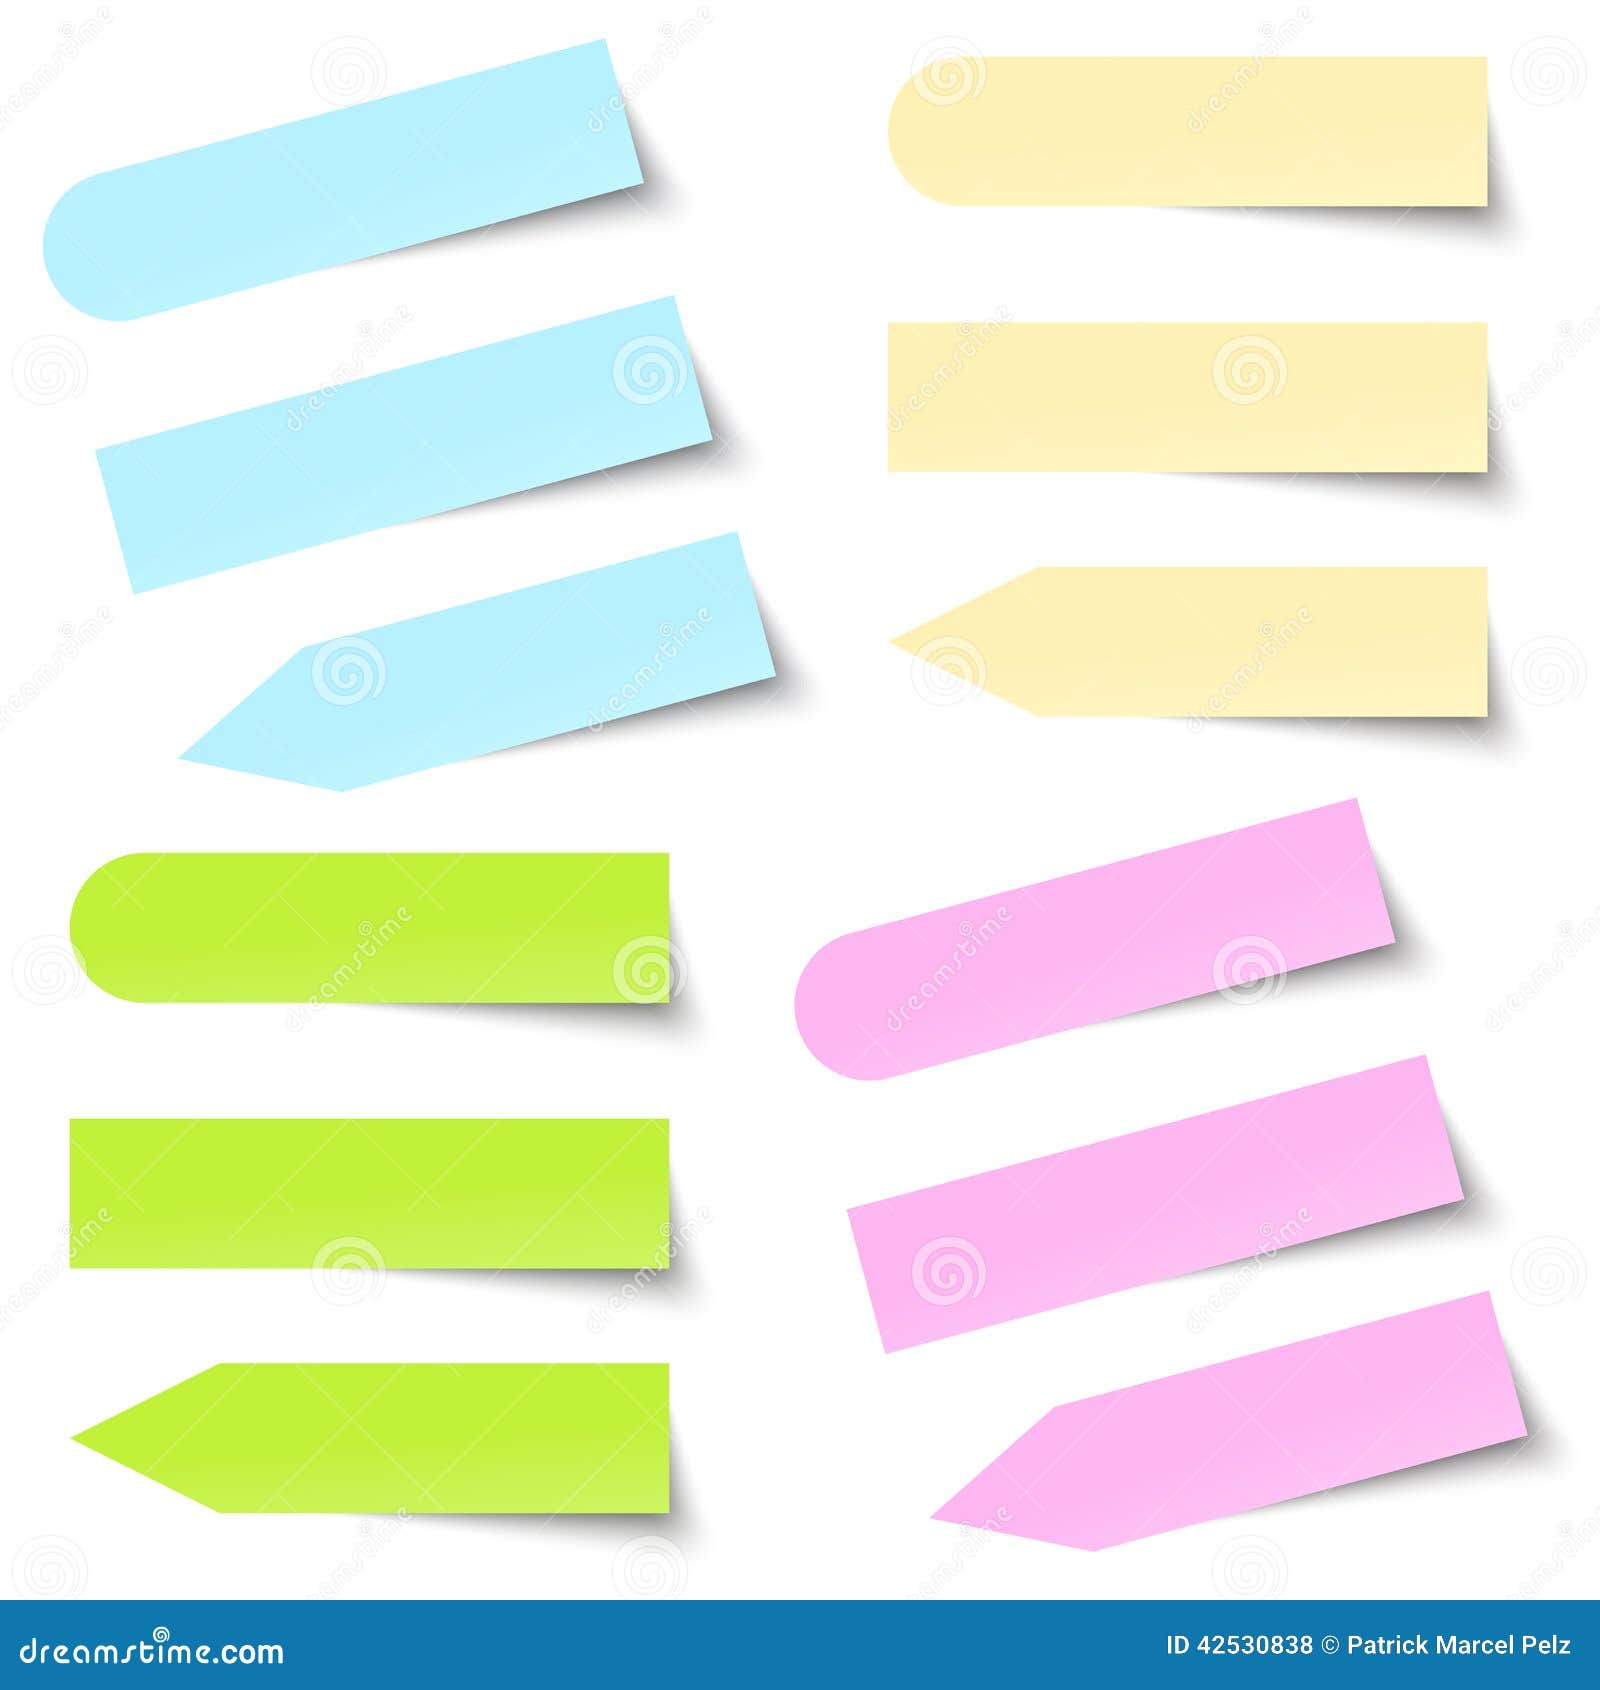 collection of colored note / memo blank